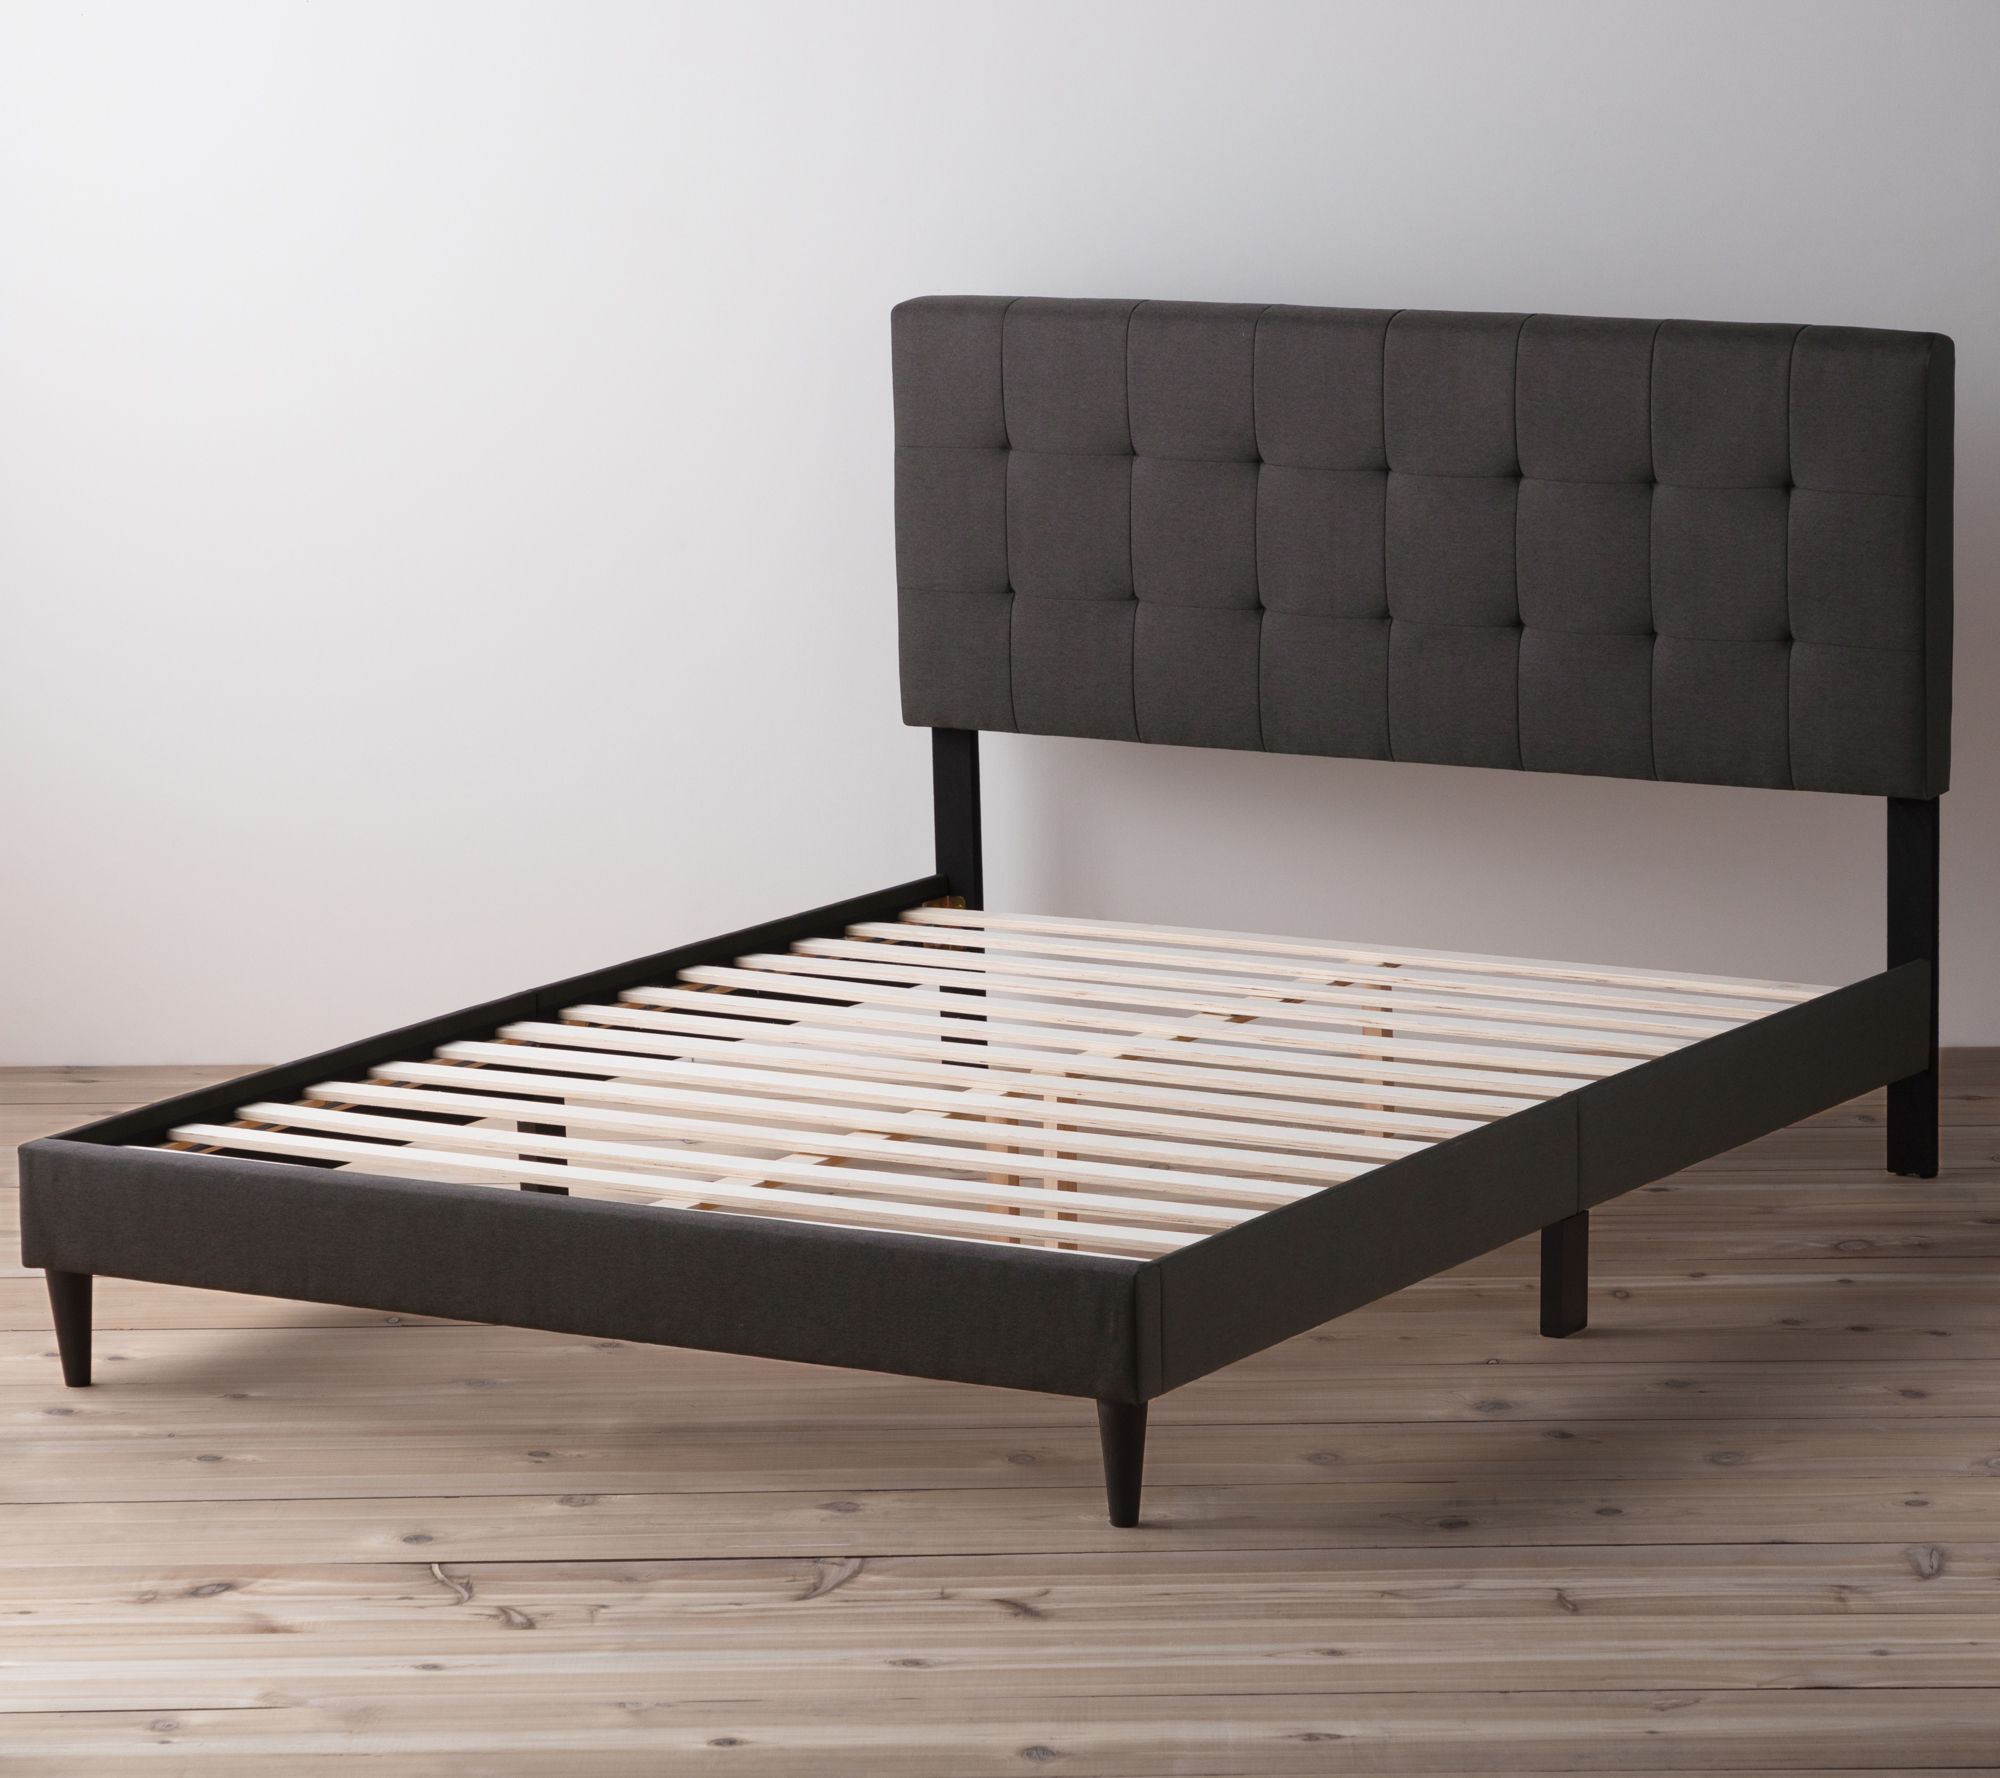 Brookside Cara Square Tufted, Cara Upholstered Charcoal Queen Platform Bed Frame With Square Tufted Headboard